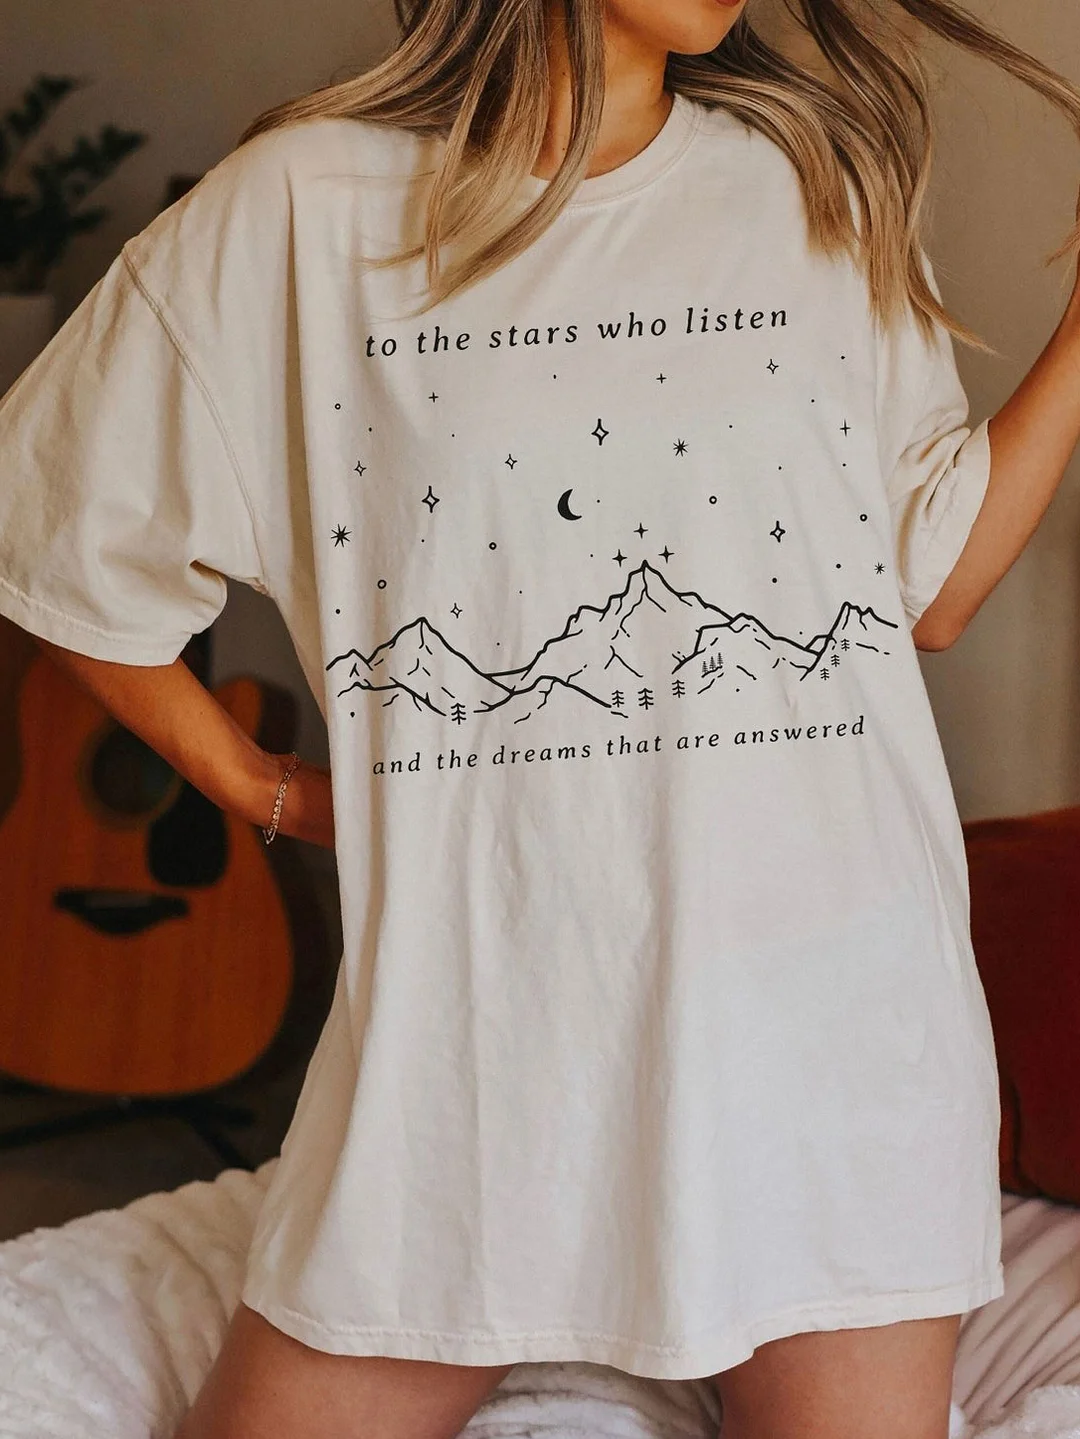 Velaris T-shirt,To The Stars Who Listen And The Dreams That Are Answer / DarkAcademias /Darkacademias